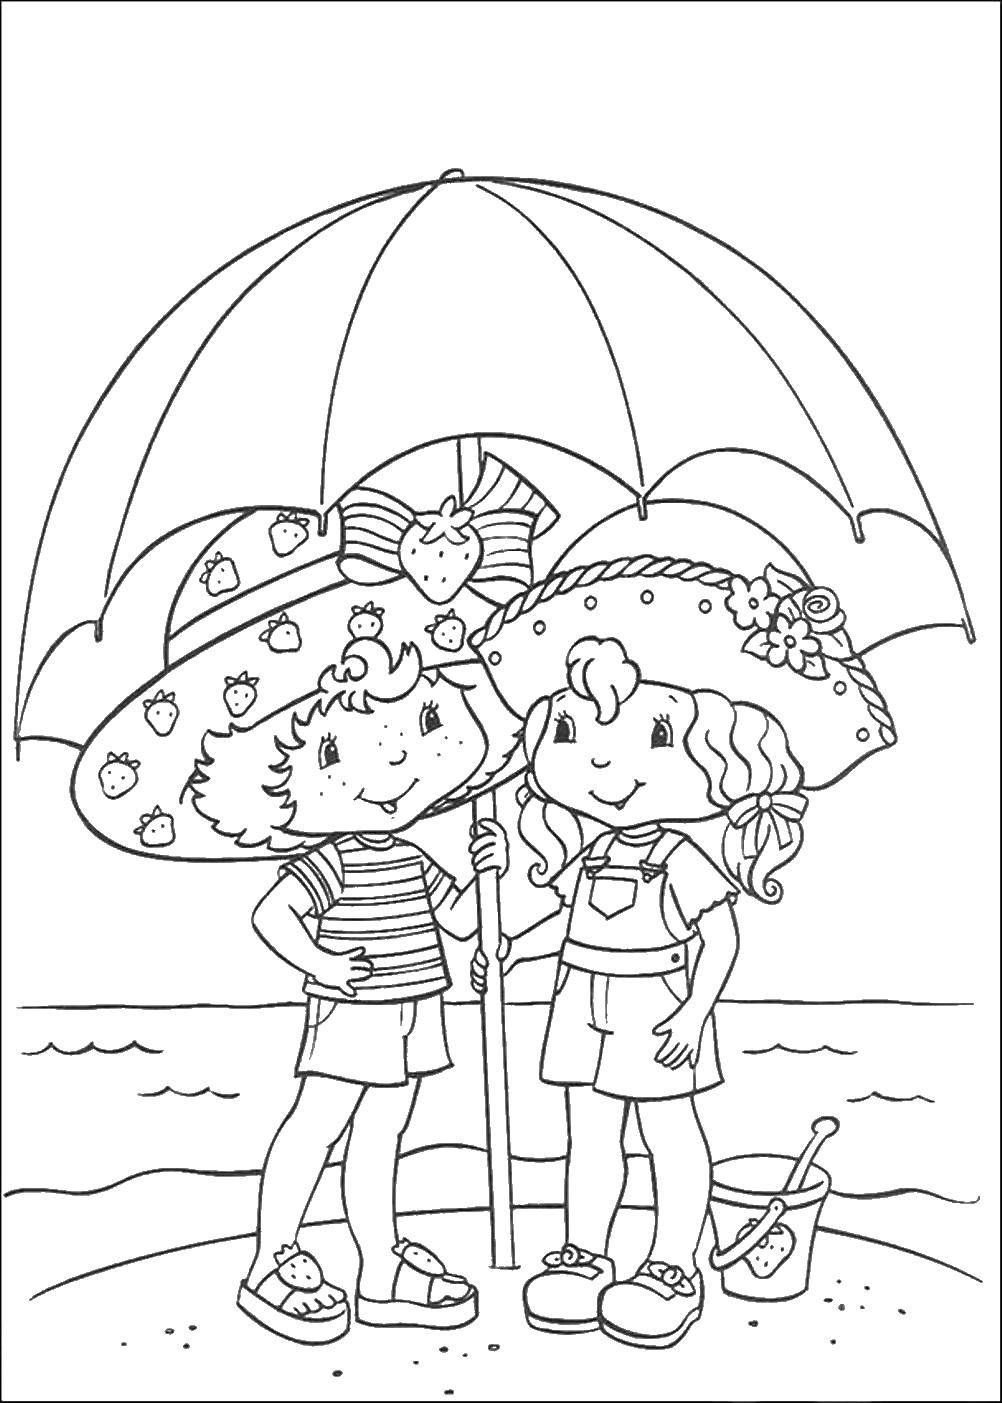 Coloring Girls under an umbrella on the beach. Category Summer fun. Tags:  Leisure, kids, water, fun.